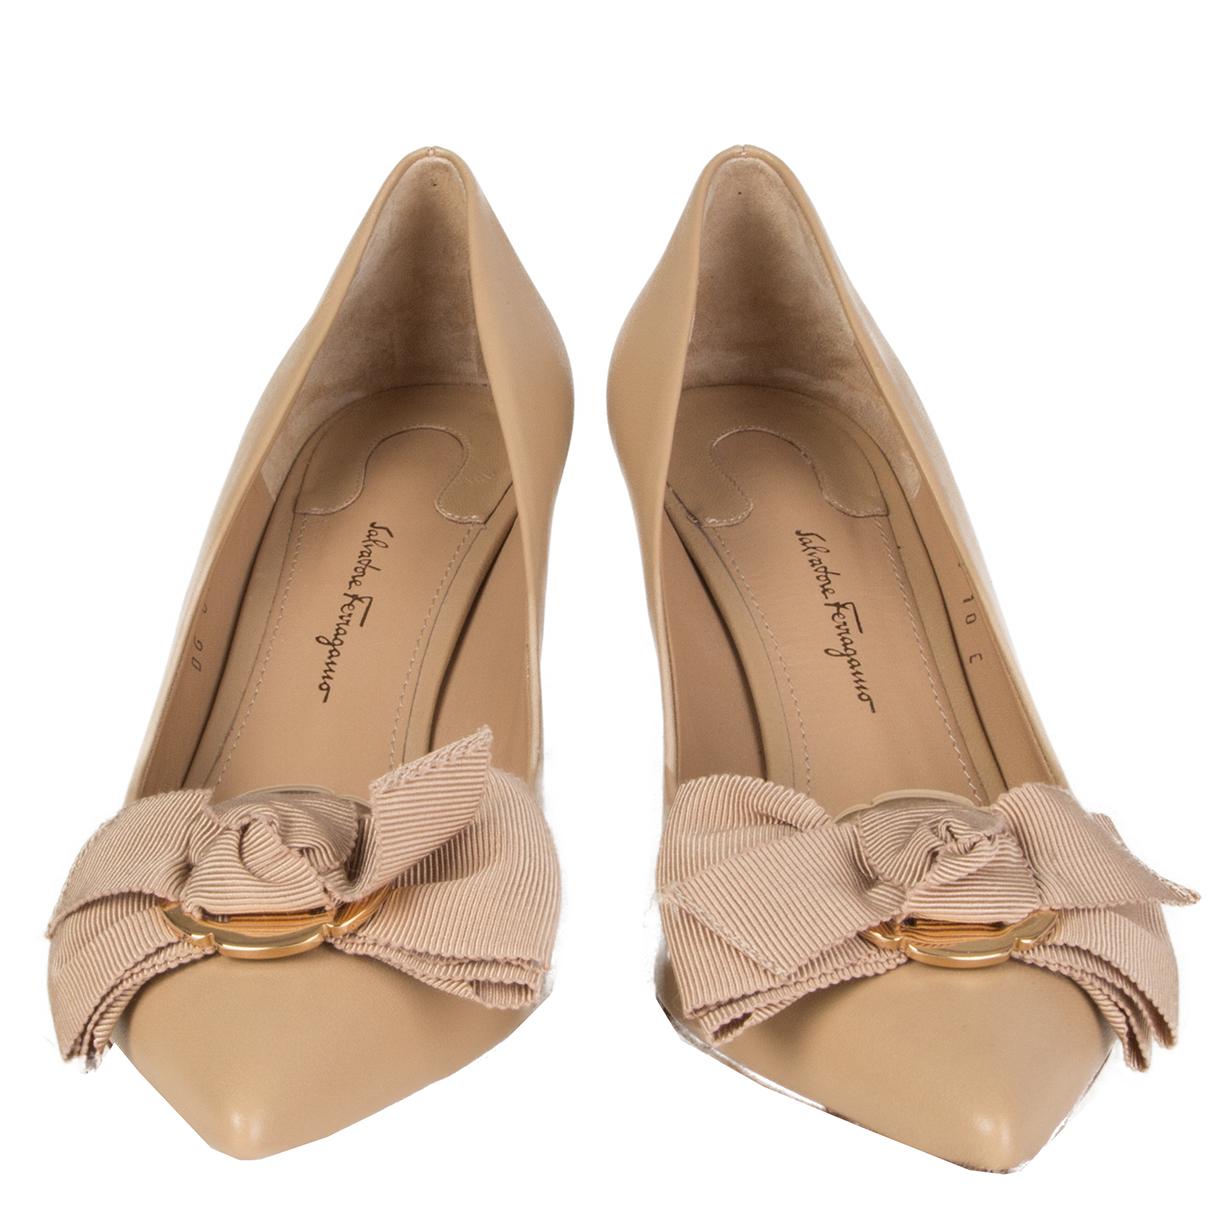 100% authentic Salvatore Ferragamo 'Talla' pointed-toe pumps in beige calfskin featuring grosgrain bow's with gold-tone hardware. Brand new. 

Measurements
Imprinted Size	10
Shoe Size	40
Inside Sole	27cm (10.5in)
Width	8cm (3.1in)
Heel	8cm